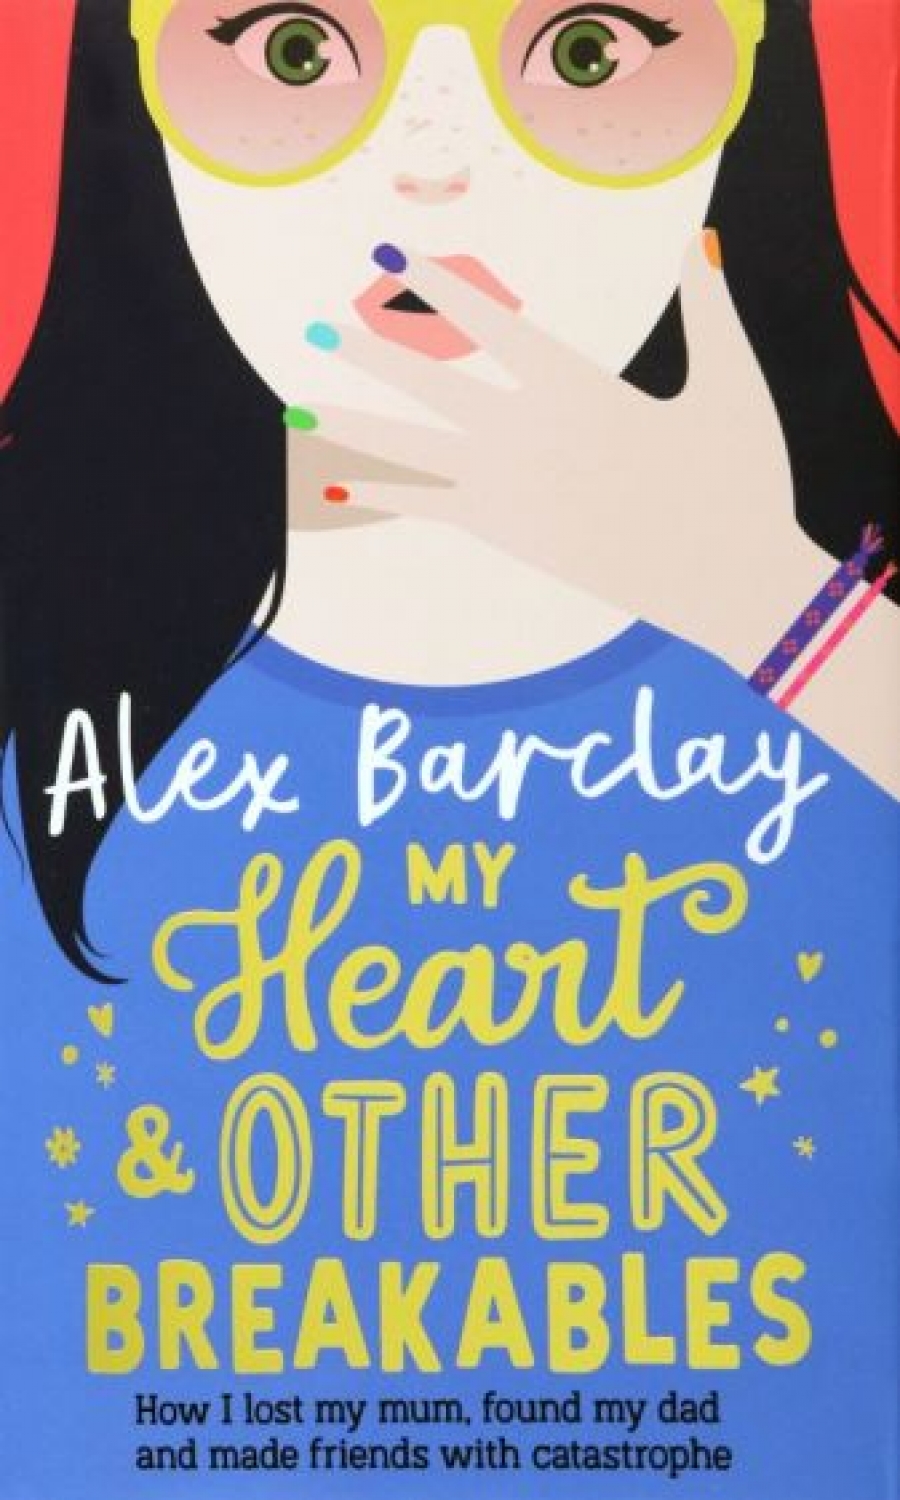 Barclay Alex My Heart & Other Breakables 